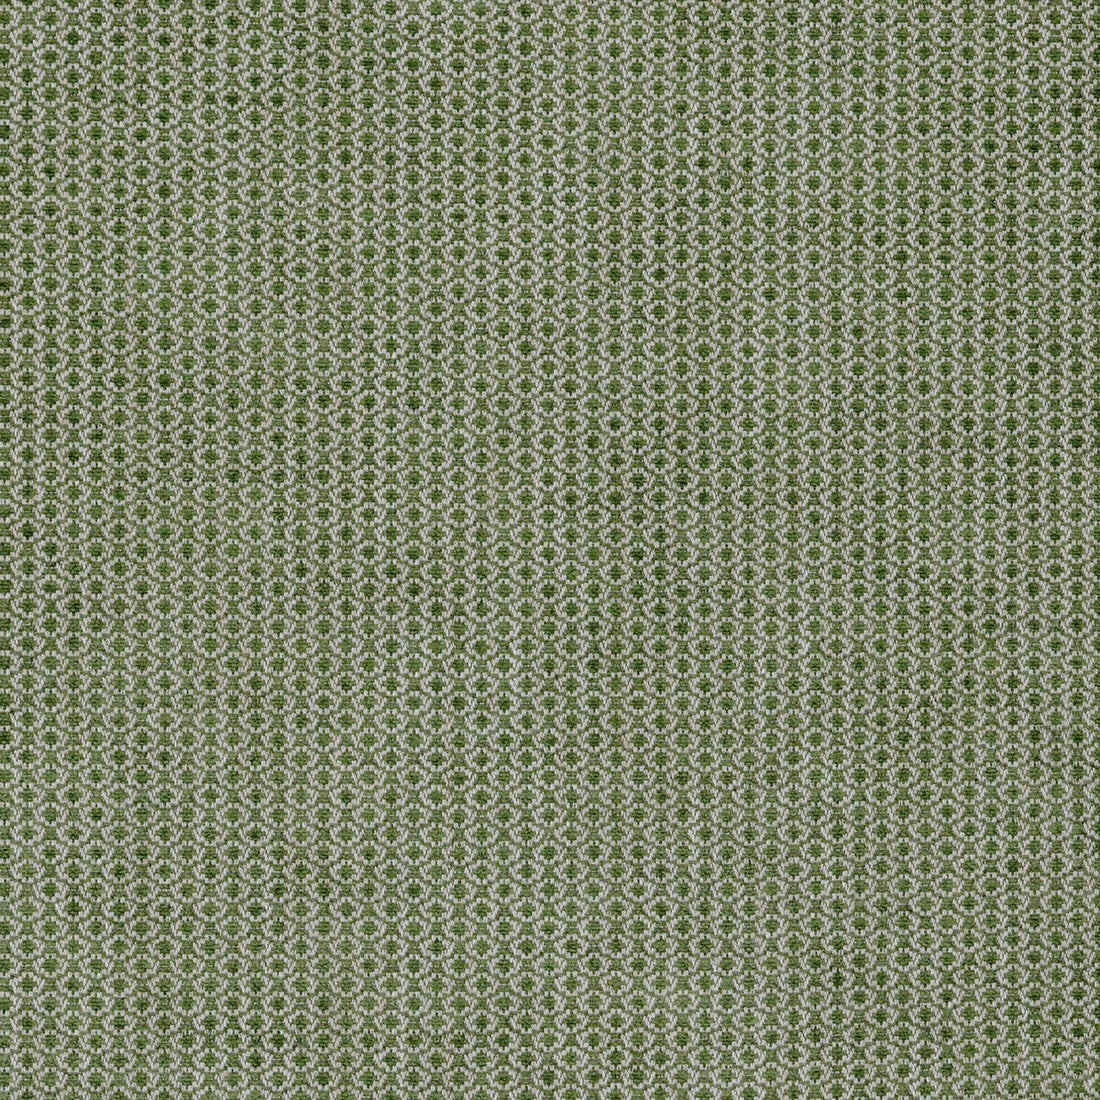 Cosgrove fabric in moss color - pattern BFC-3672.3.0 - by Lee Jofa in the Blithfield collection